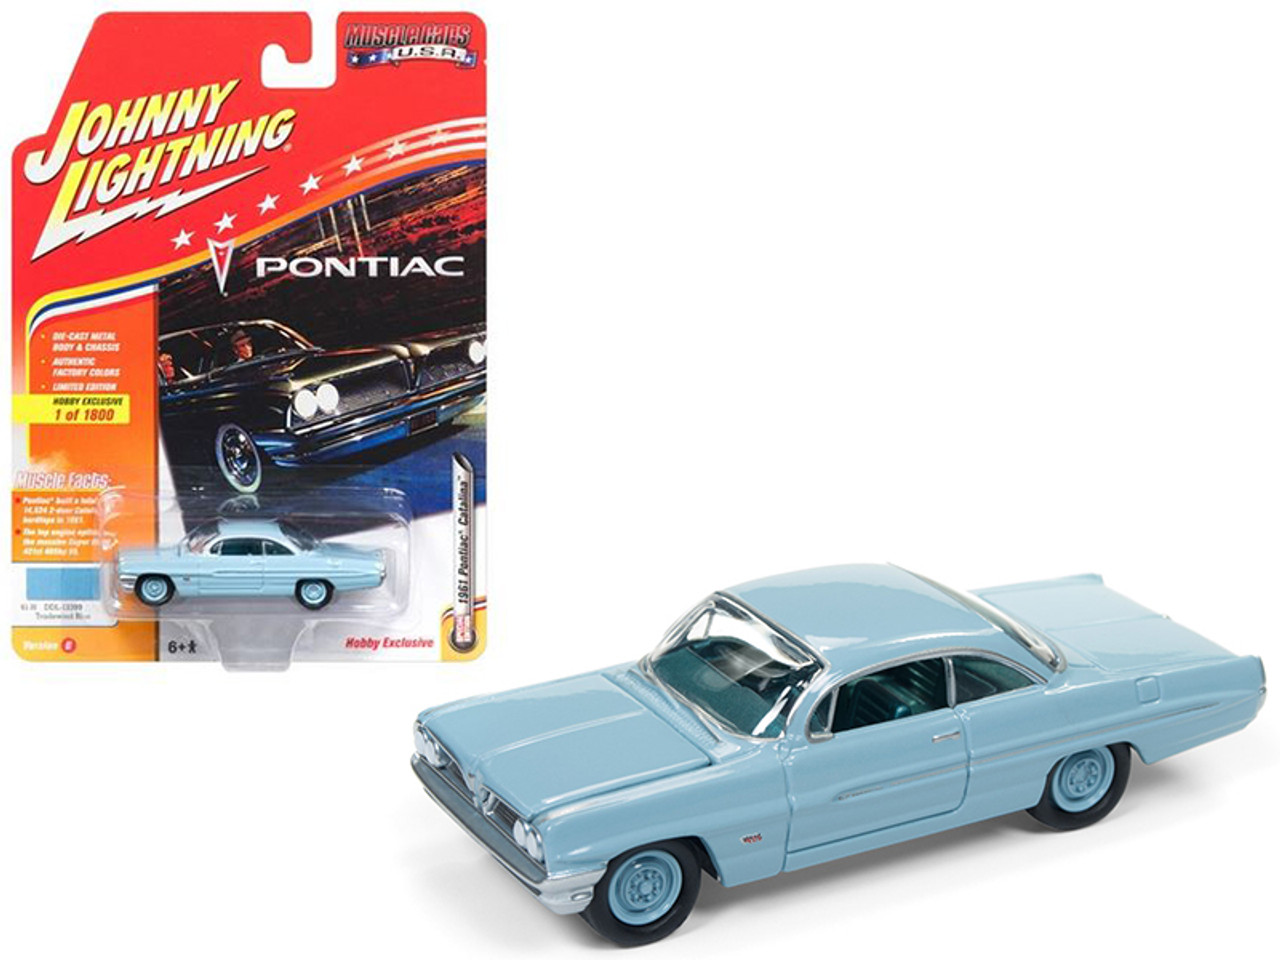 1961 Pontiac Catalina Tradewind Blue Limited Edition to 1800pc Worldwide Hobby Exclusive "Muscle Cars USA" 1/64 Diecast Model Car by Johnny Lightning